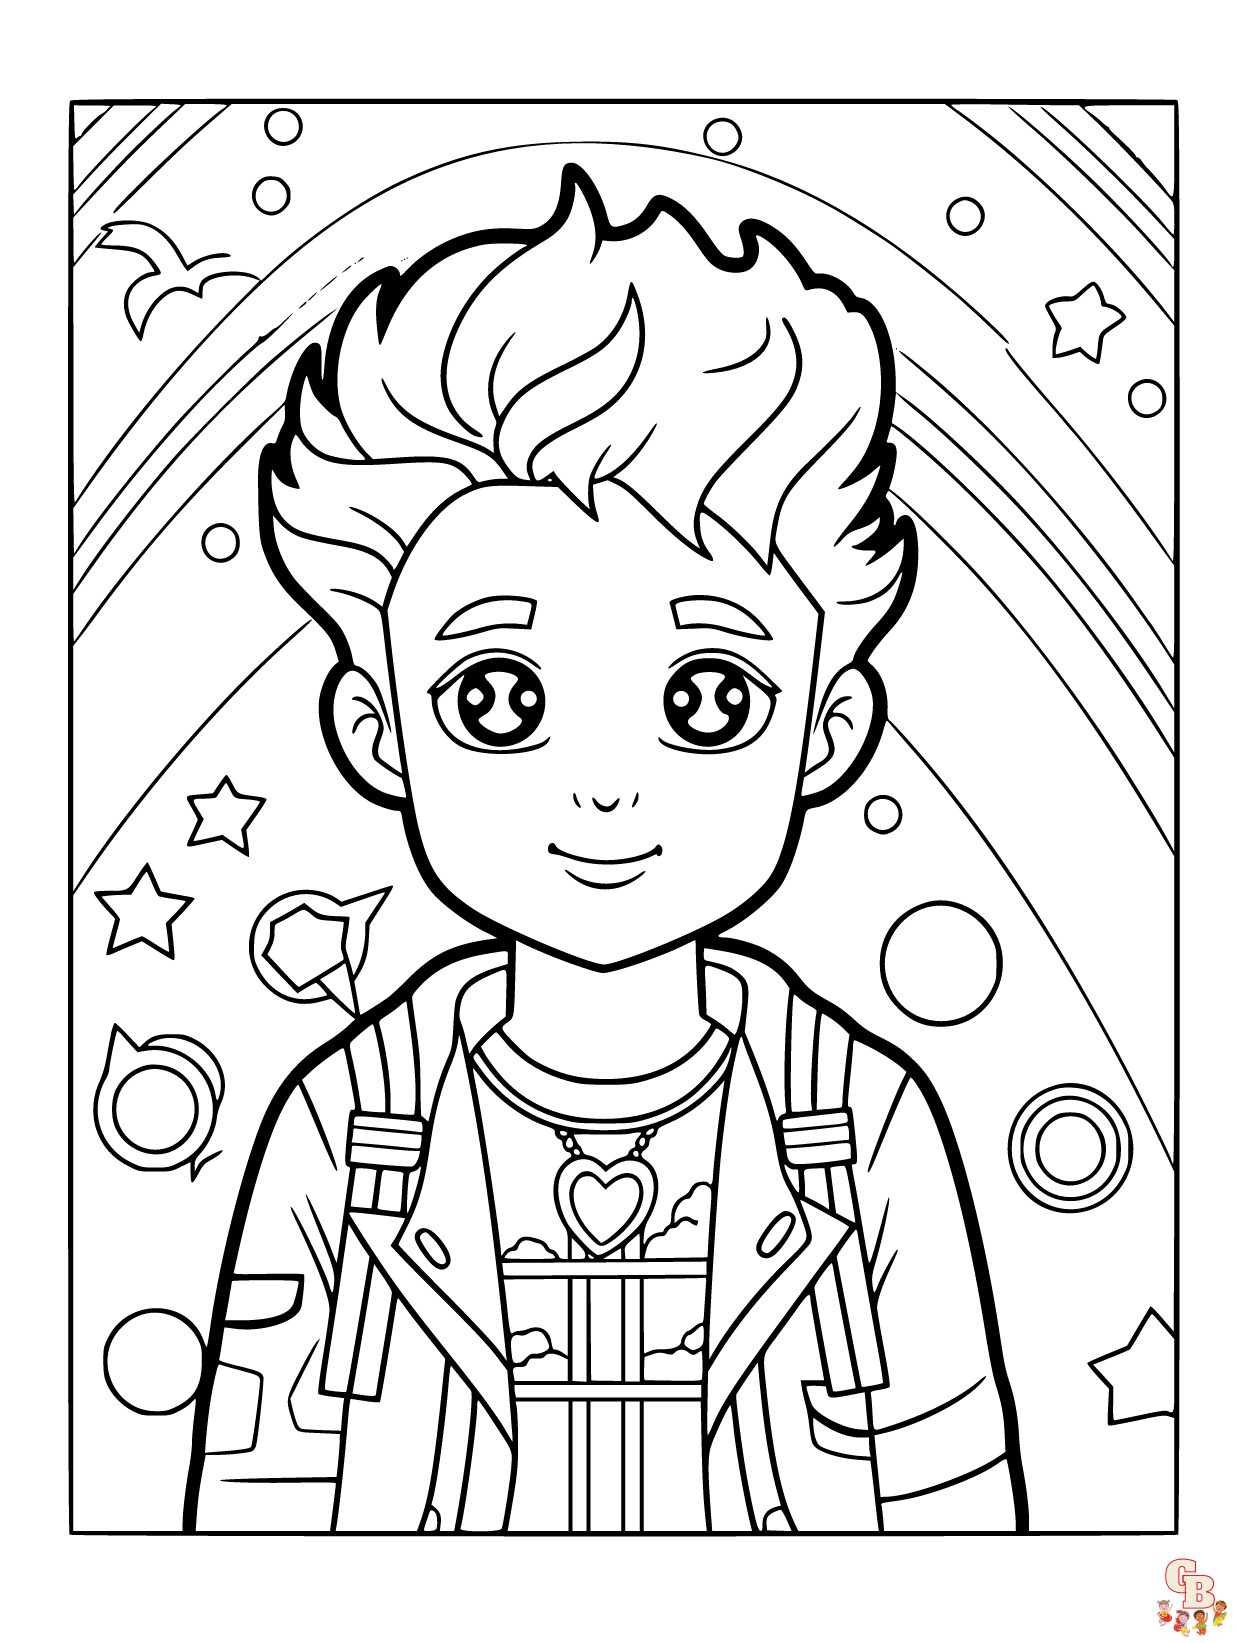 Pride Month coloring pages to print